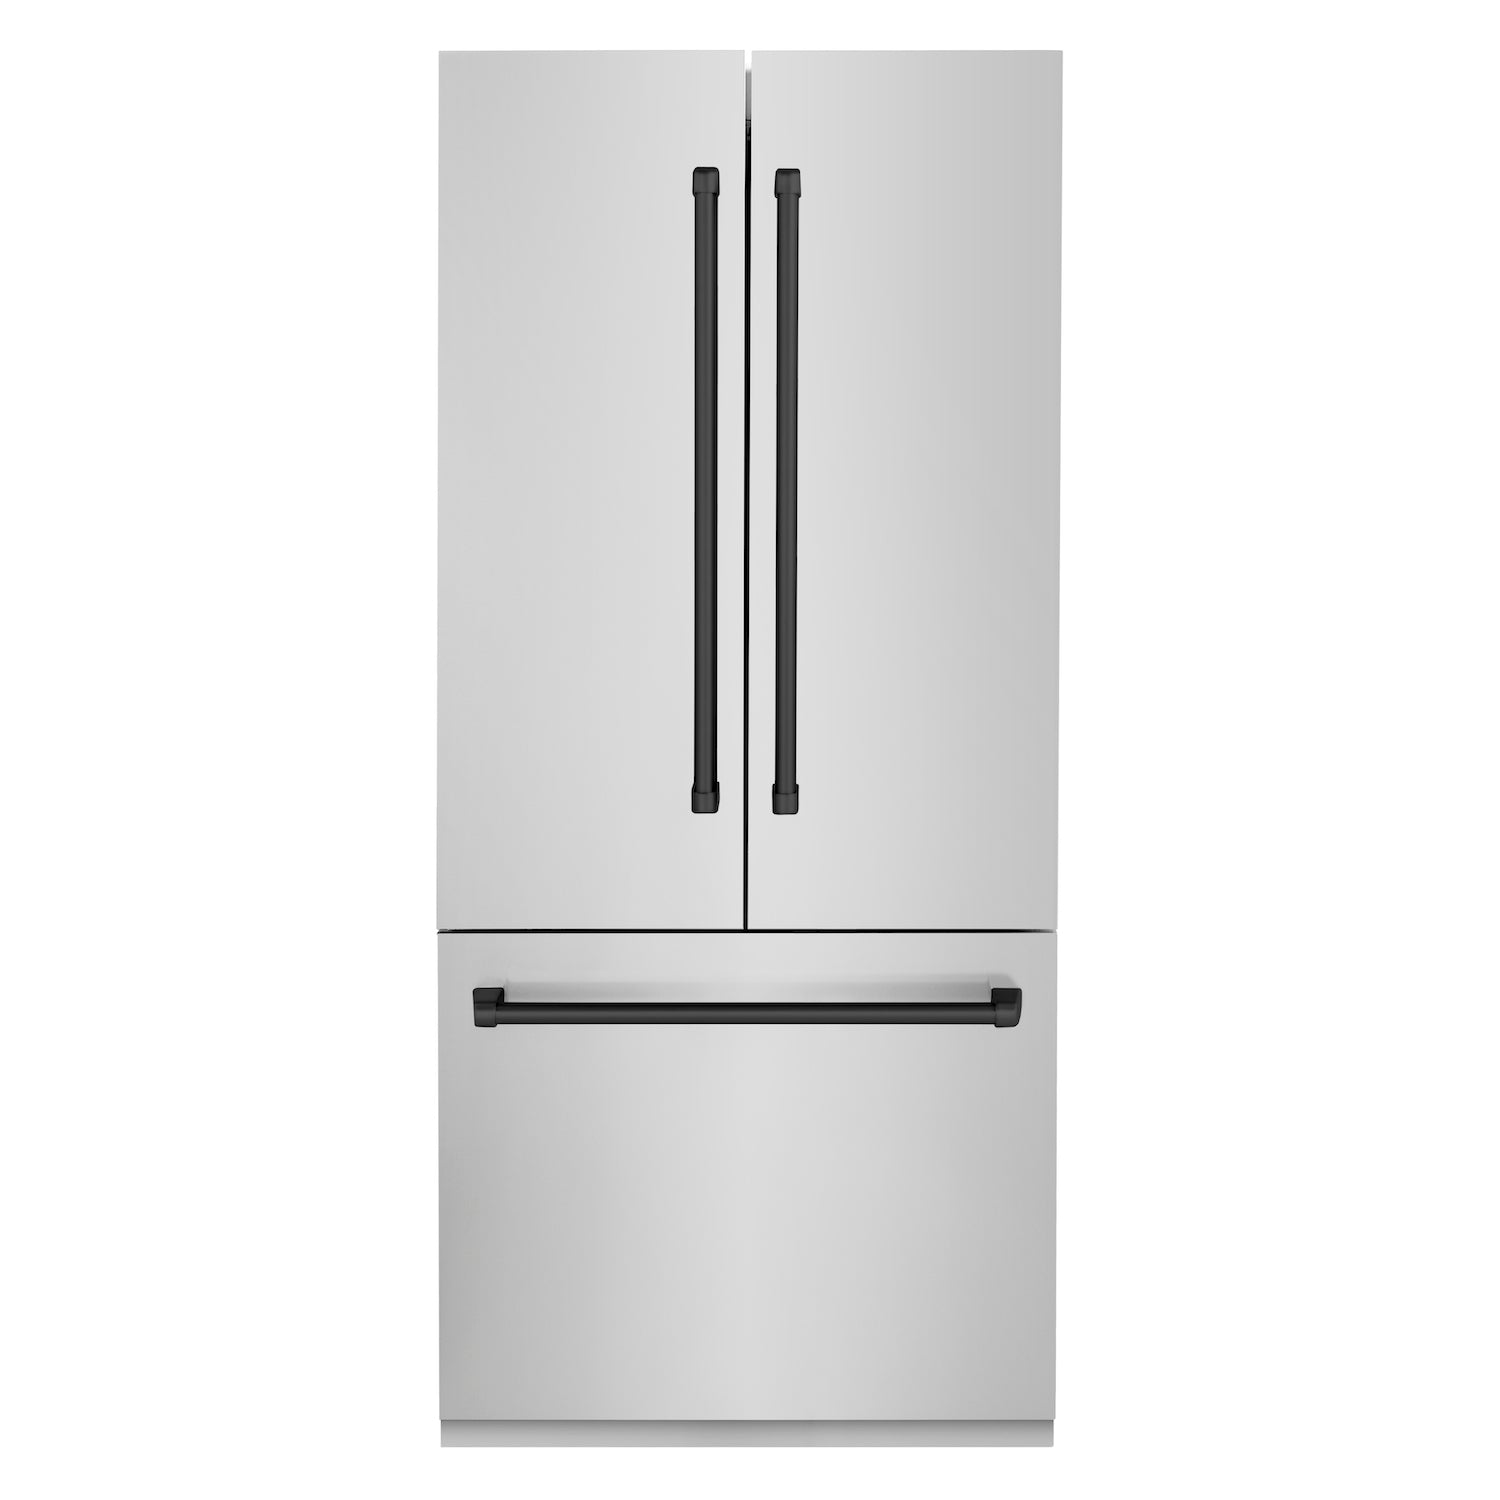 ZLINE Autograph Edition 36 in. 19.6 cu. ft. Built-in 2-Door Bottom Freezer Refrigerator with Internal Water and Ice Dispenser in Stainless Steel with Matte Black Accents (RBIVZ-304-36-MB) front, closed.